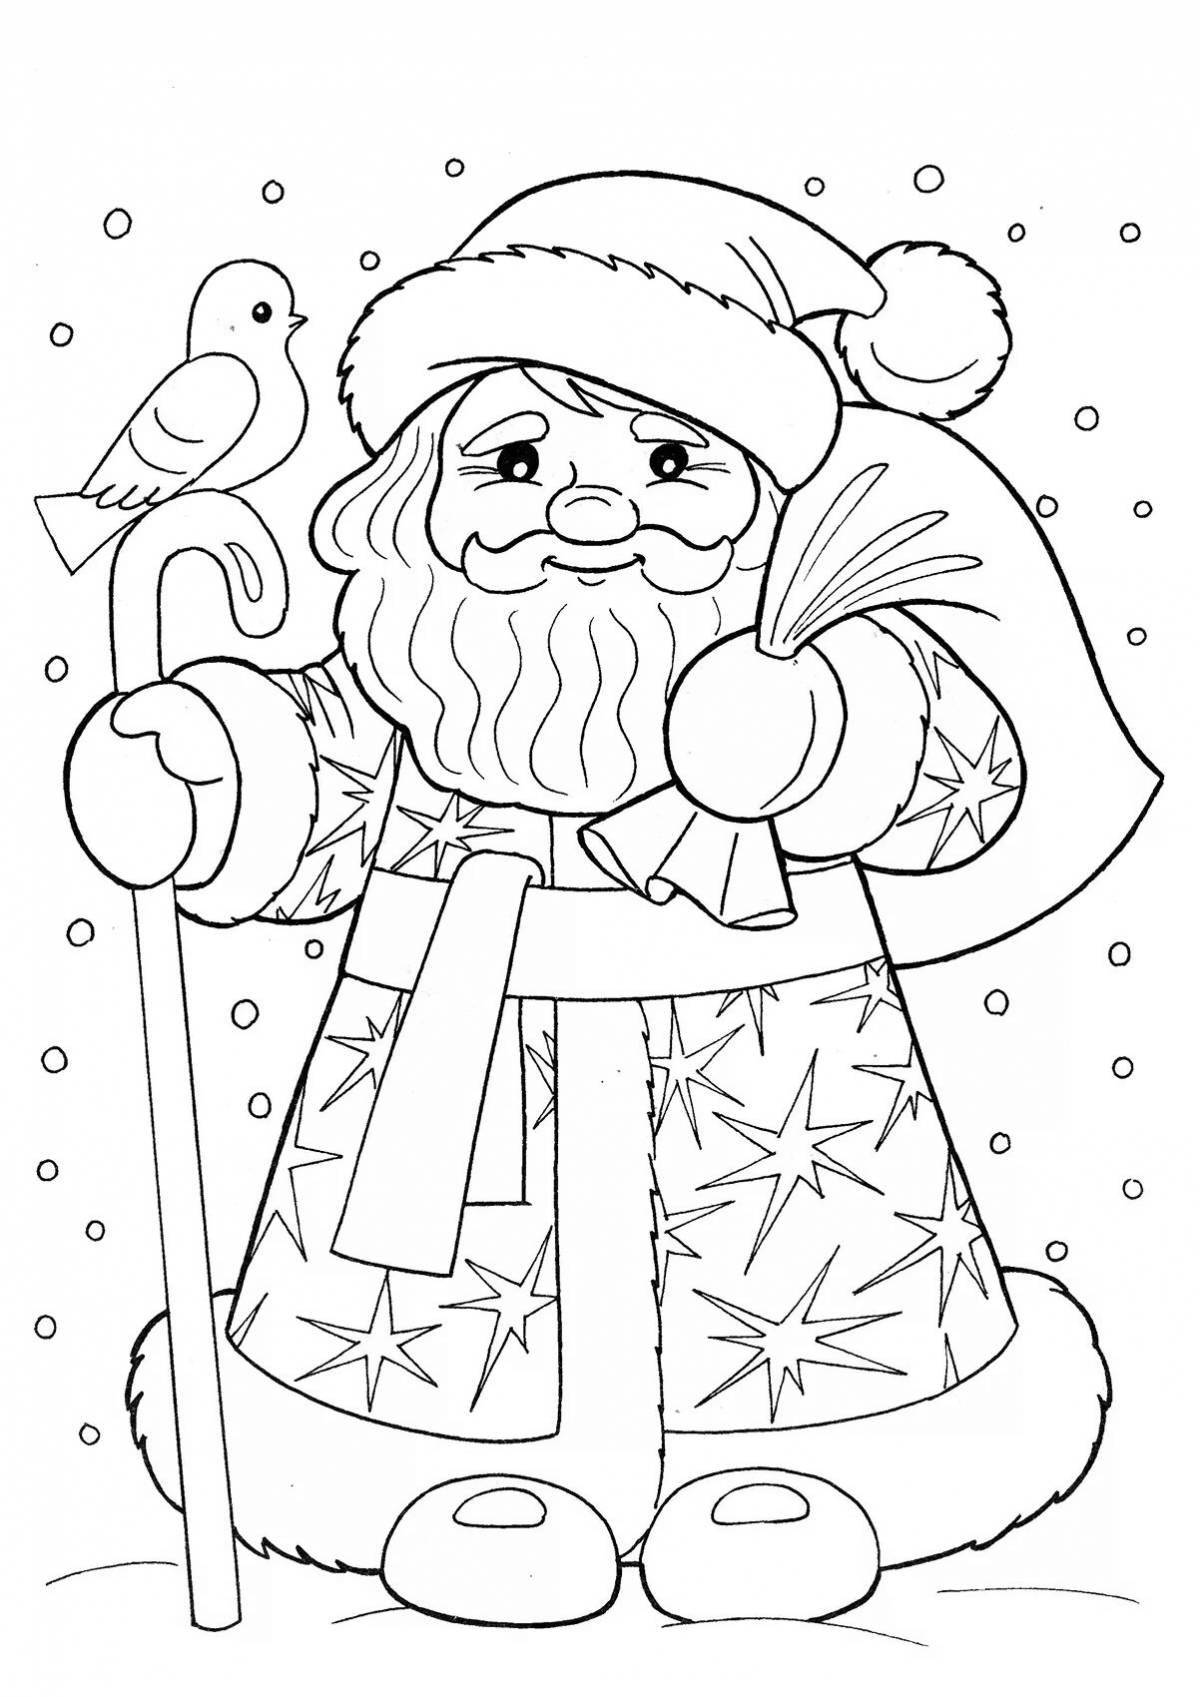 A fascinating Christmas coloring book for children aged 6-7